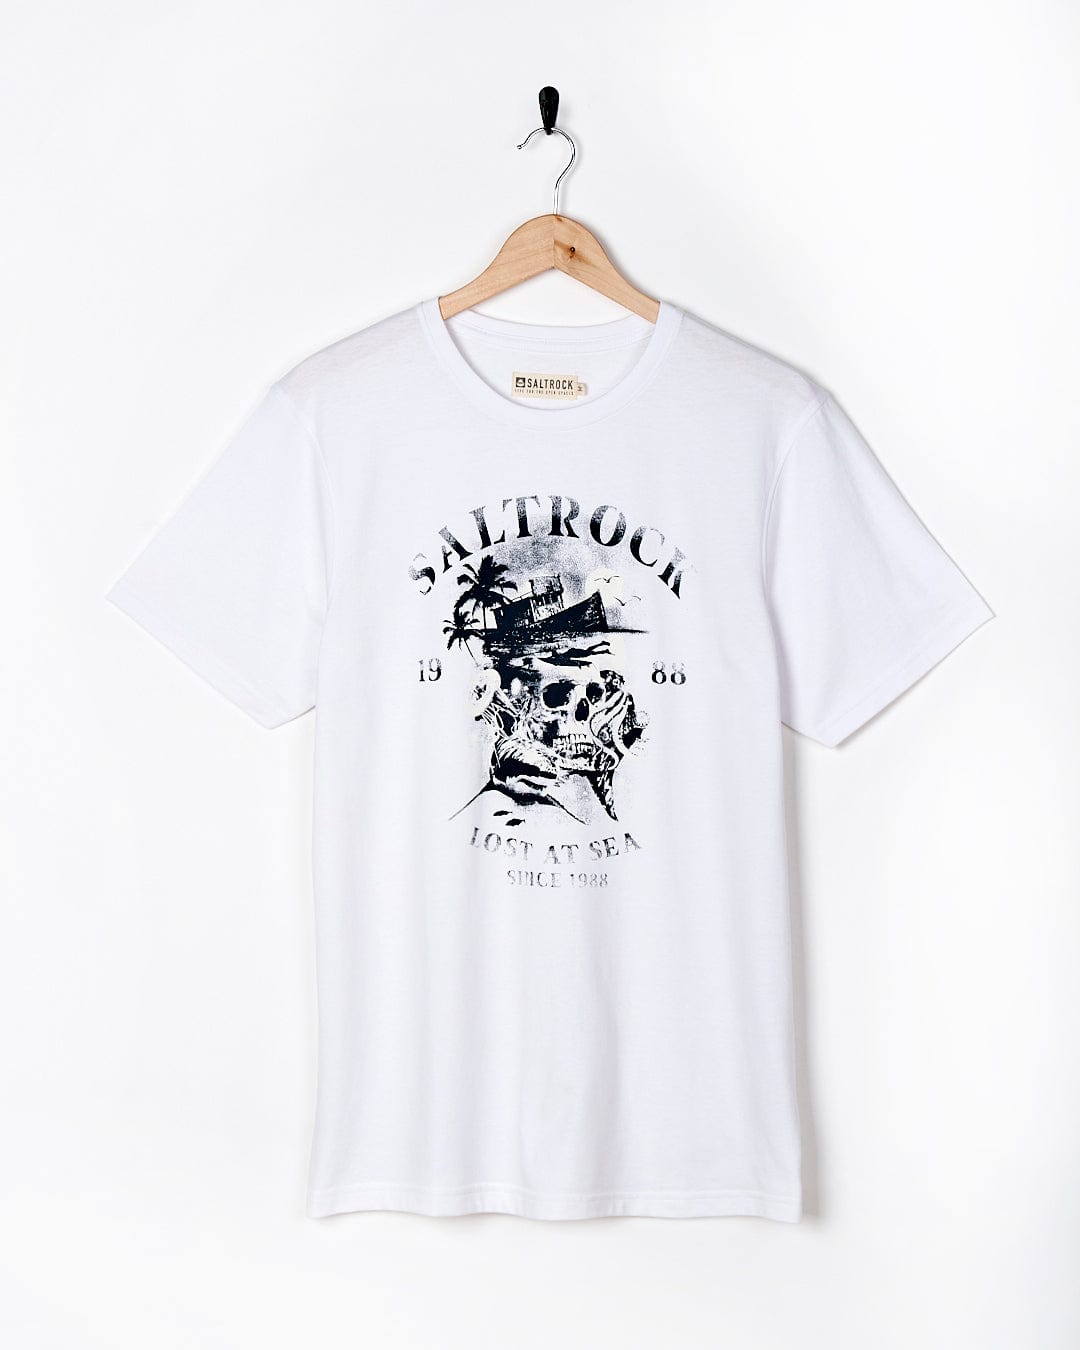 A Lost At Sea Skull - Mens Short Sleeve T-Shirt - White by Saltrock with a skull and crossbones on it.